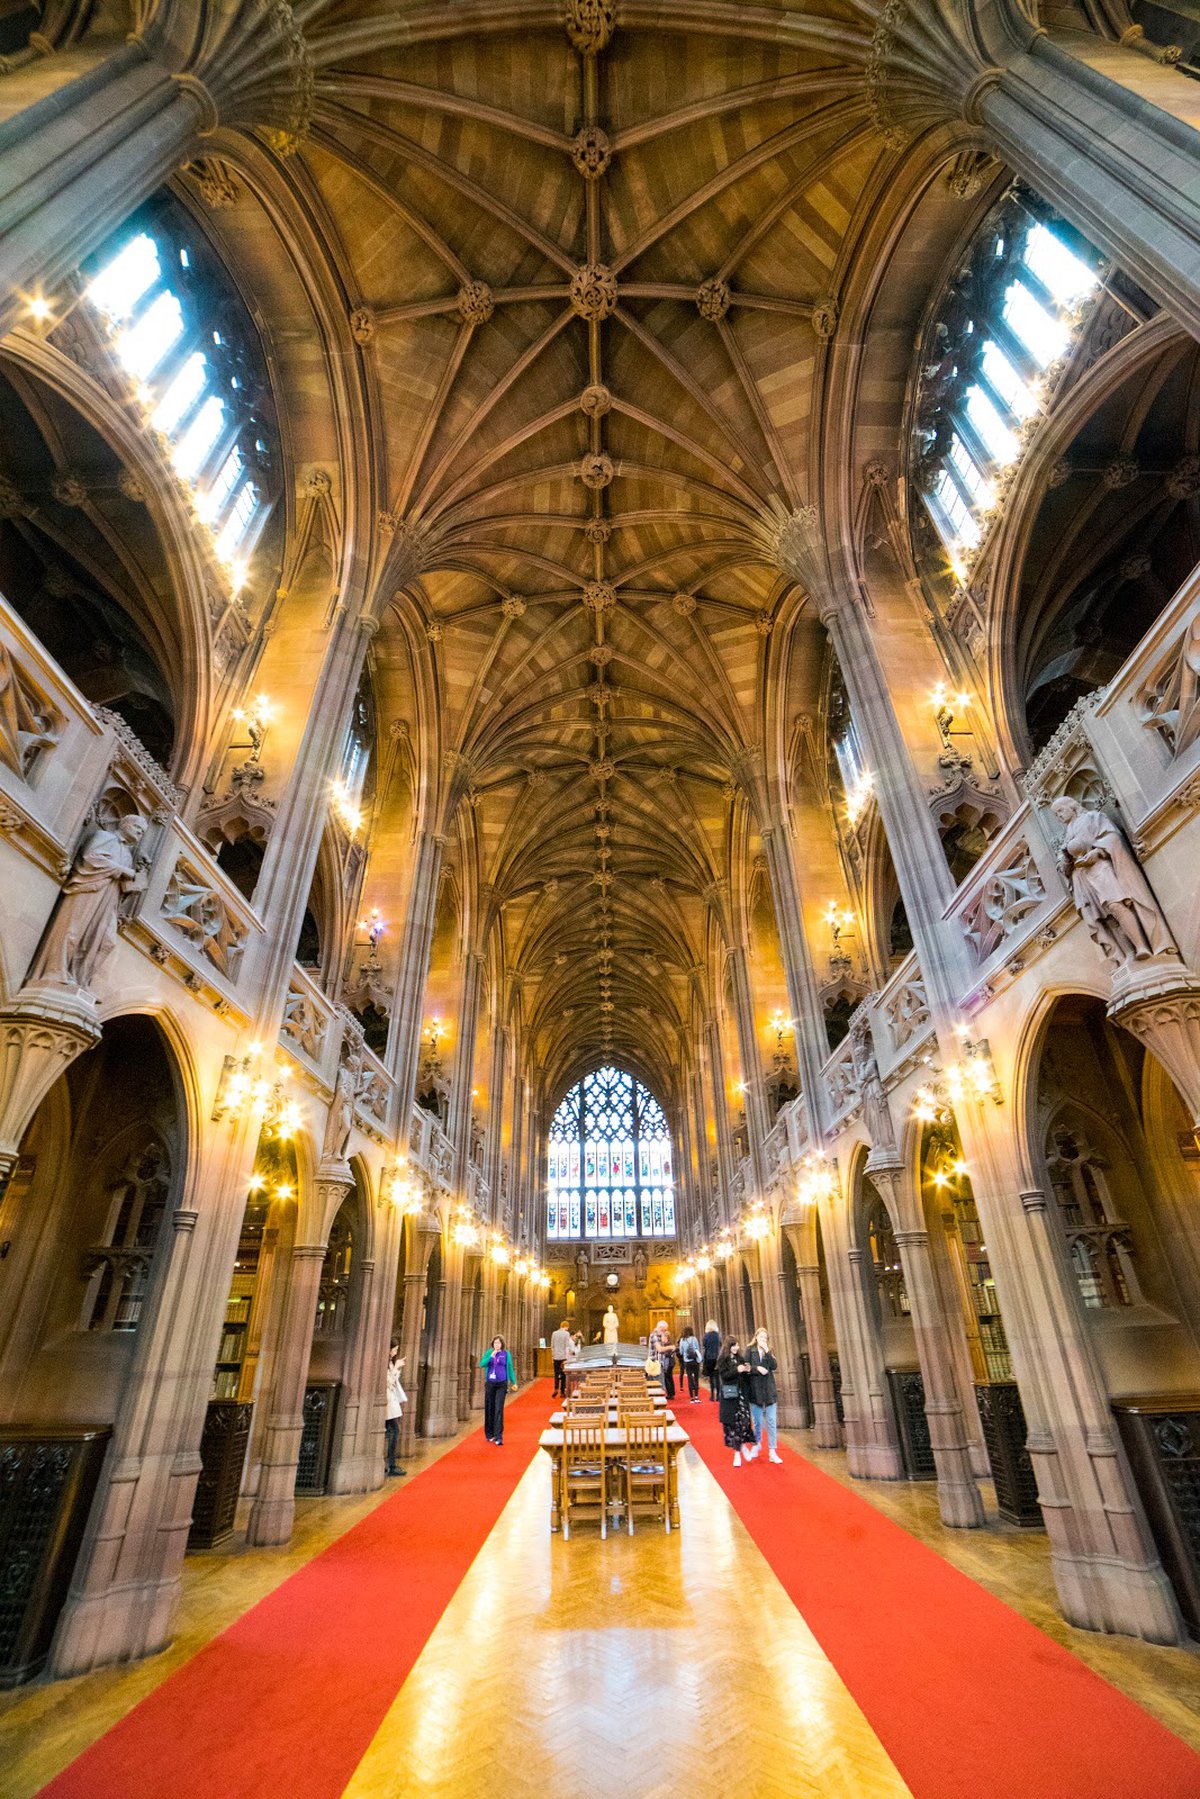 A picture of John Rylands Research Institute and Library